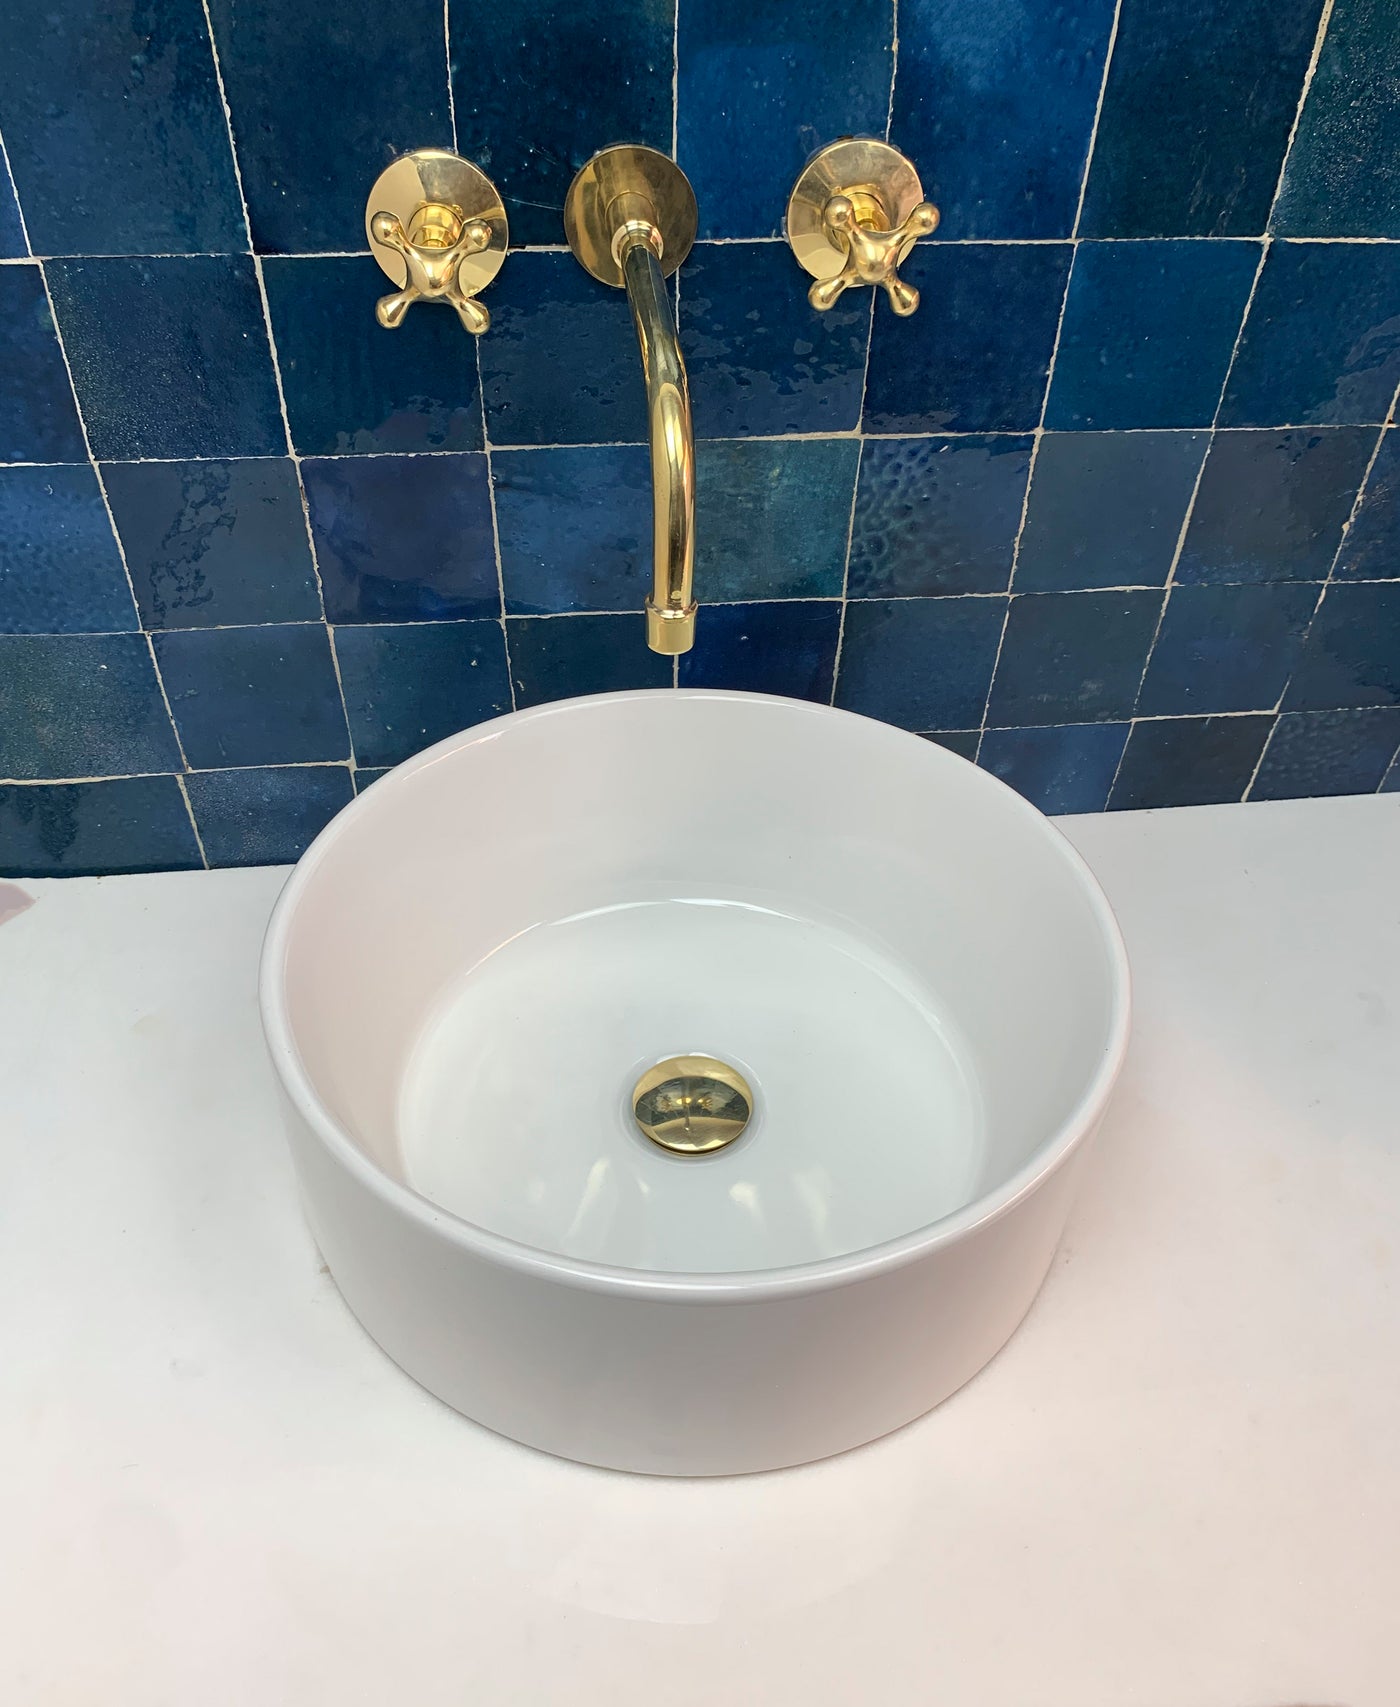 HANDCRAFTED ANTIQUE BRASS WALL MOUNTED FAUCET - Triazadesigns